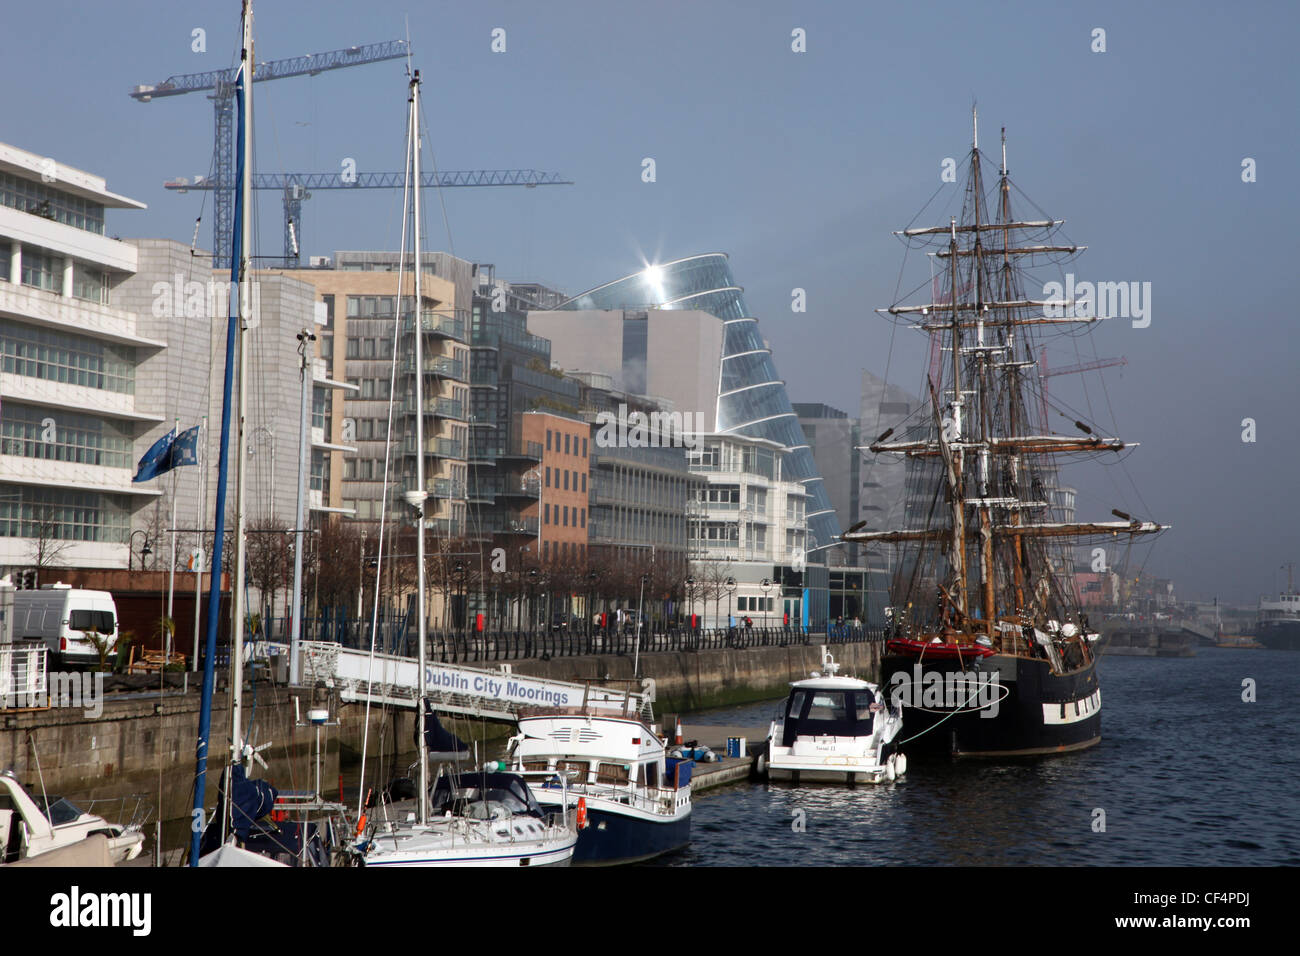 Boats and a tall ship at Dublin City Moorings on the River Liffey in the North Wall area. Stock Photo